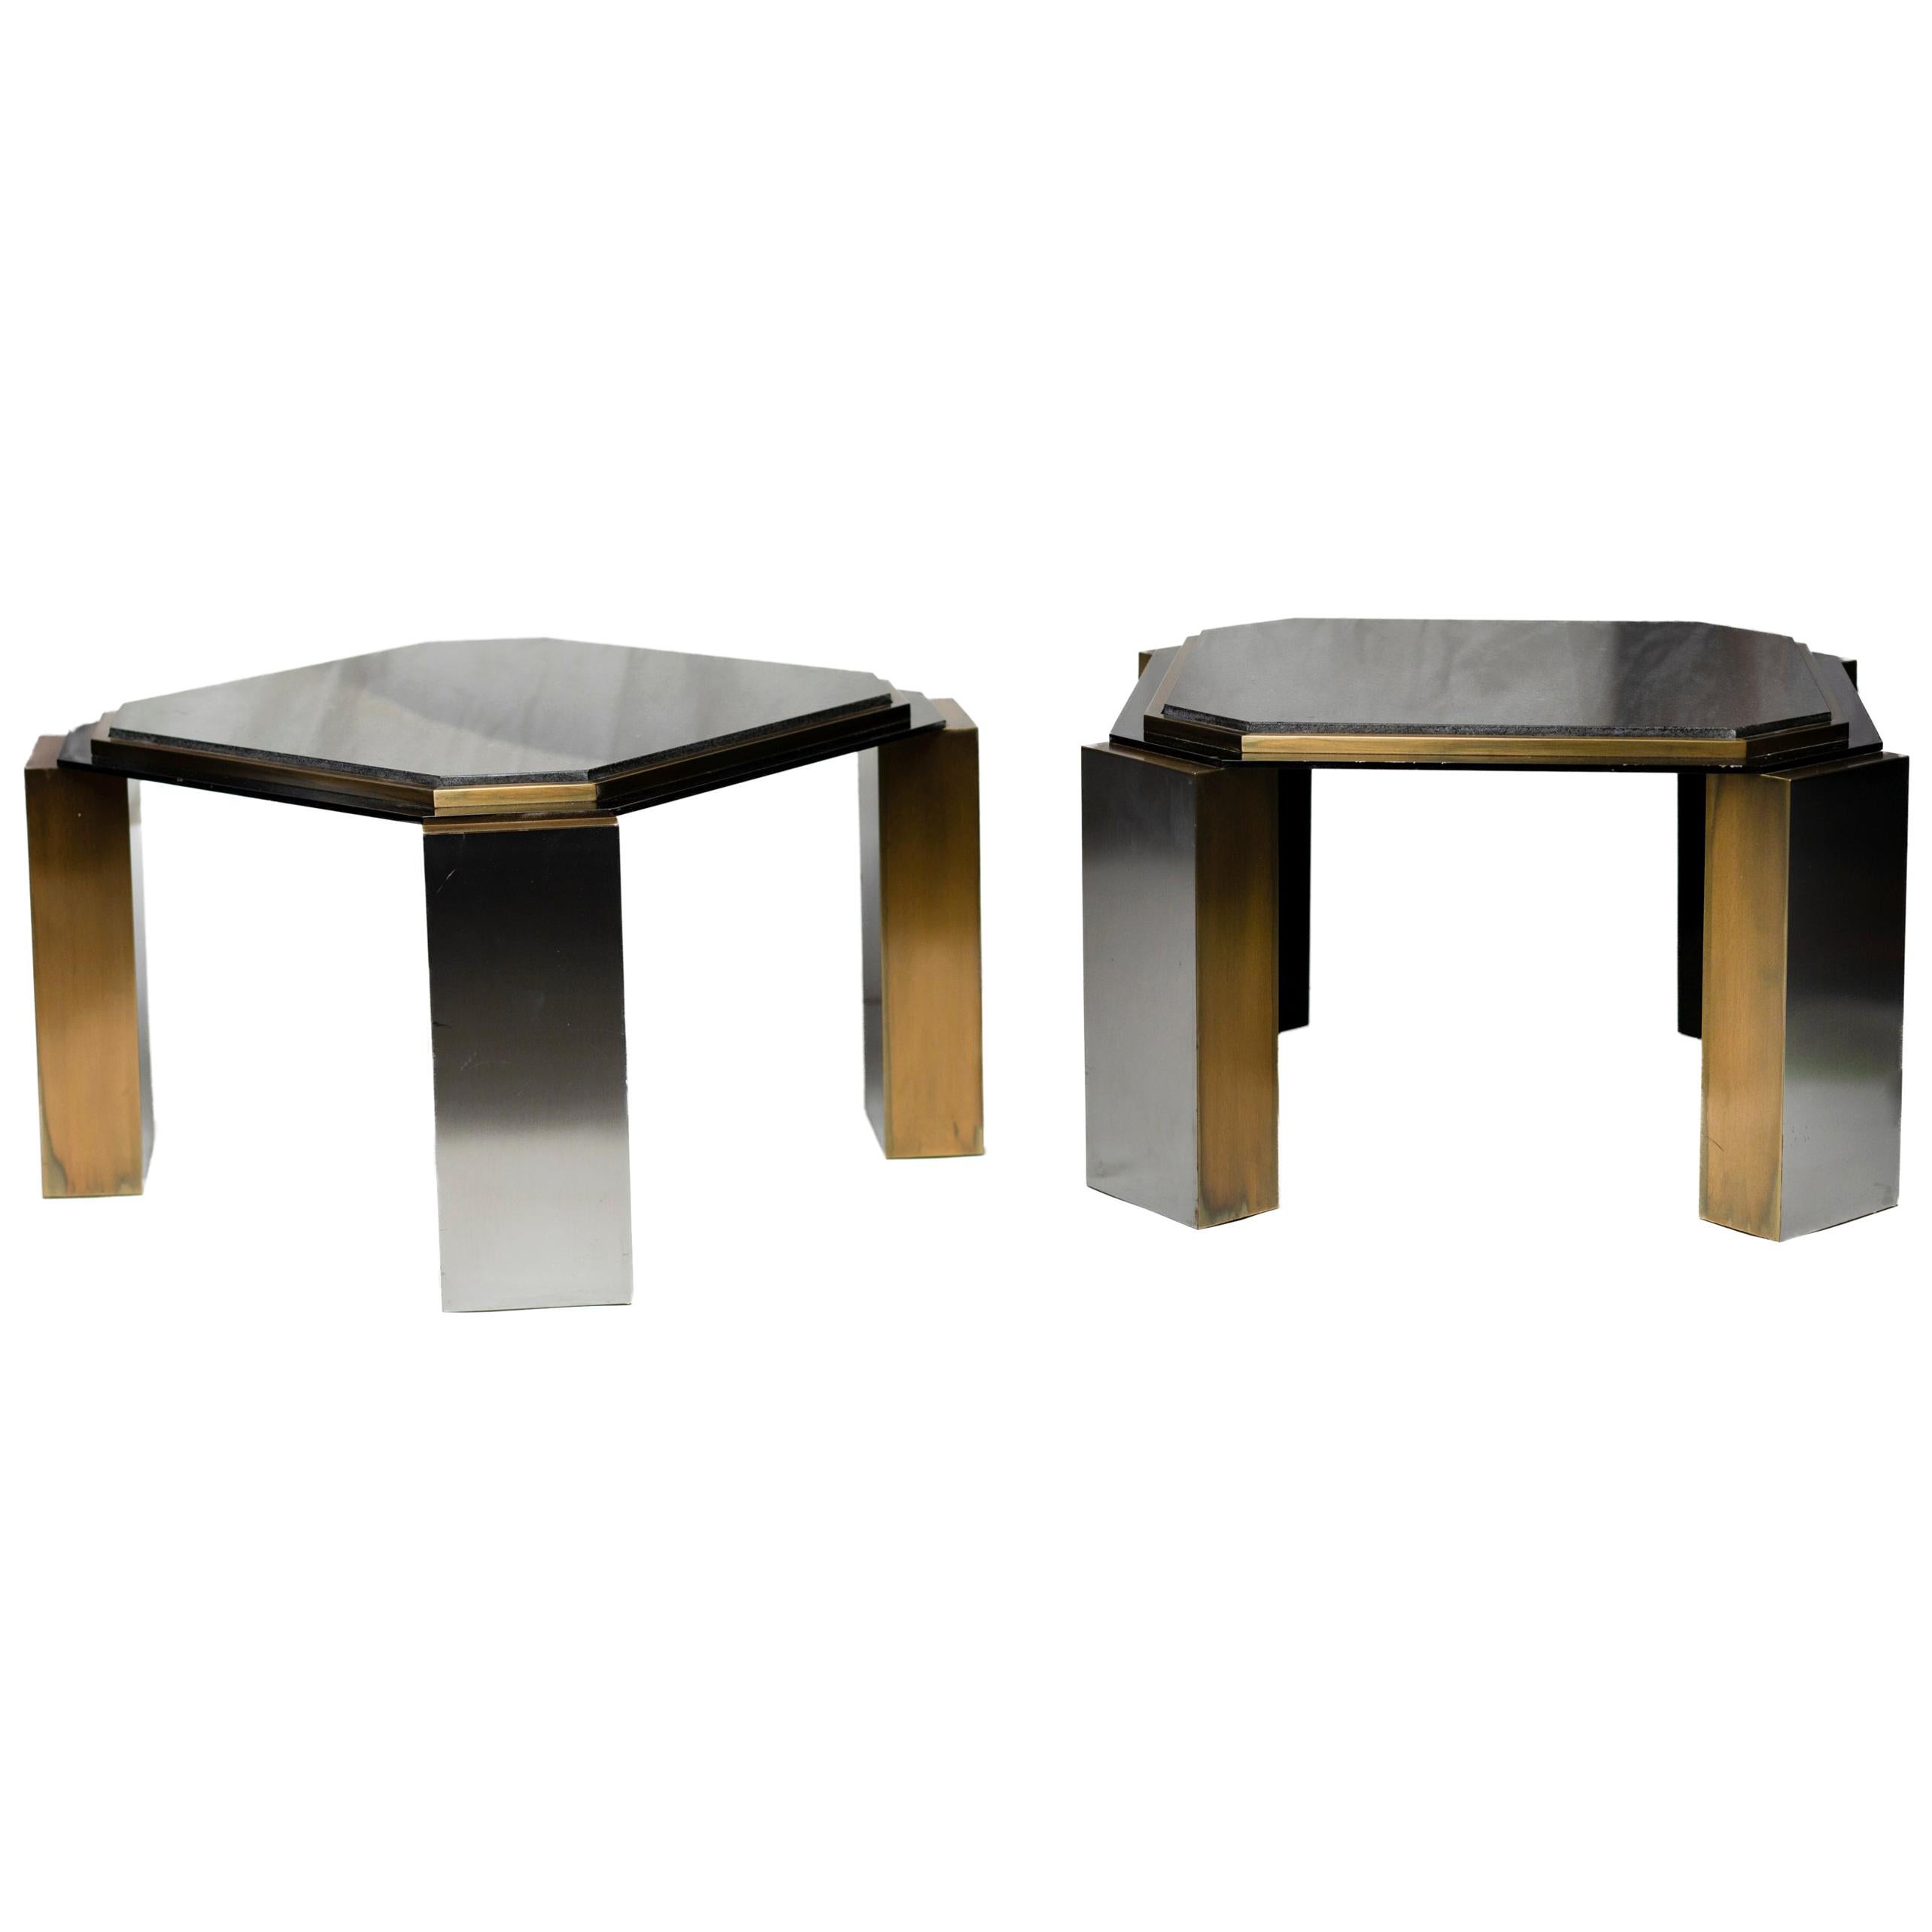 Pair of 1980's Modernist Low Tables in Enameled Steel and Patinated Brass For Sale